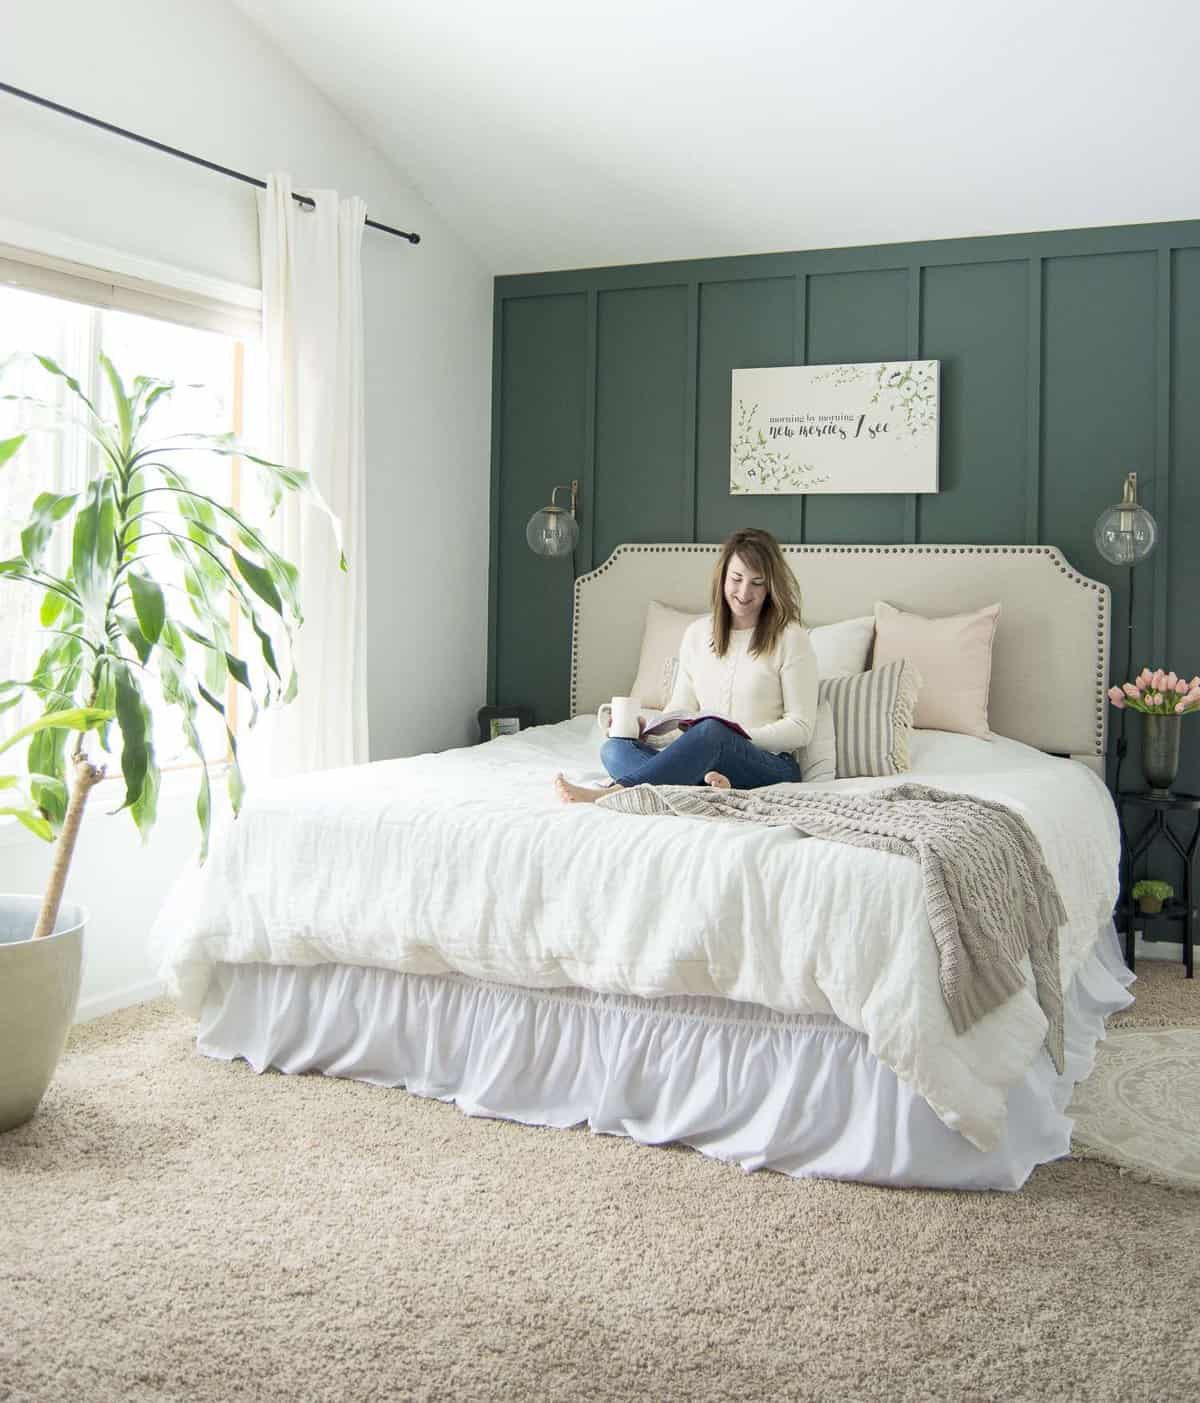 Do you love a combination of modern, cottage, and farmhouse design styles? Learn the key elements that make a simple modern farmhouse bedroom today! #fromhousetohaven #modernfarmhousebedroom #modernfarmhouse #bedroomdecor